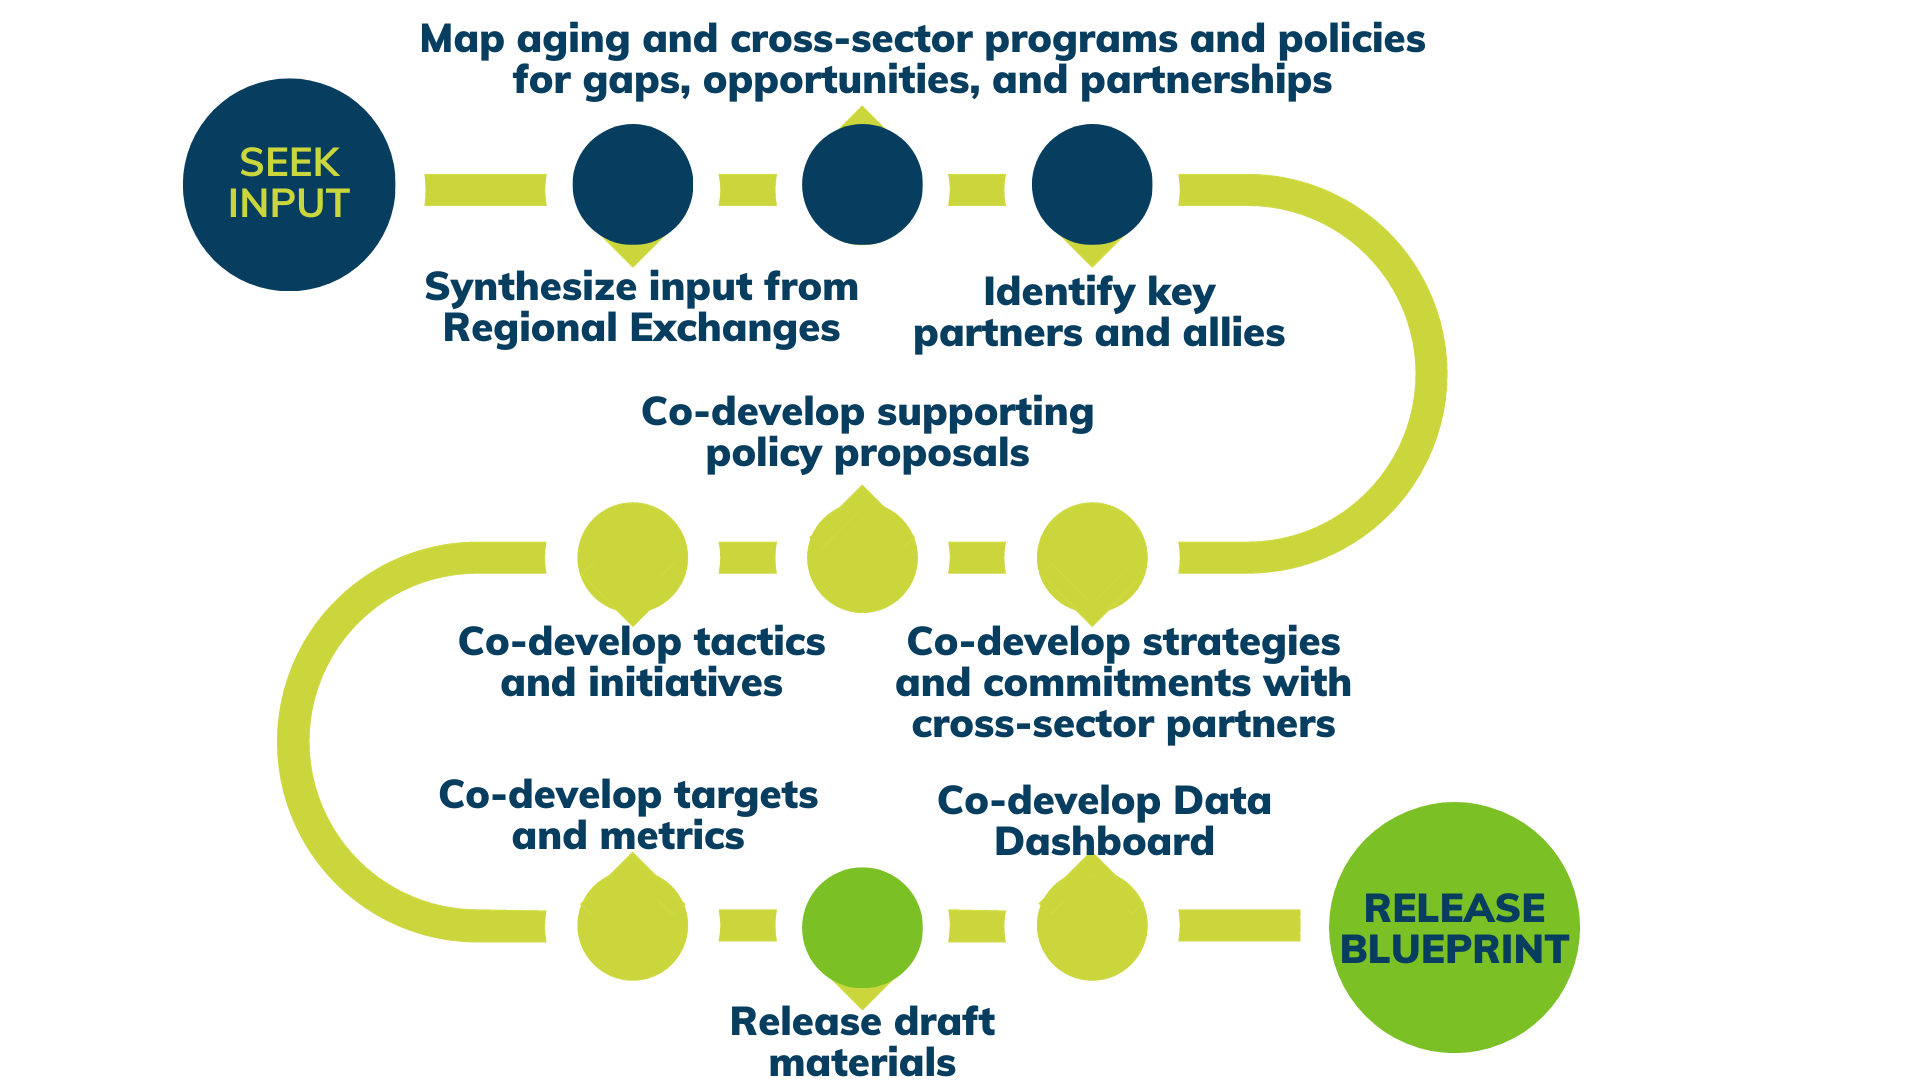 A flow chart that shows a process starting with seeking input, moving to co-developing plan elements, and ends with the release of a blueprint